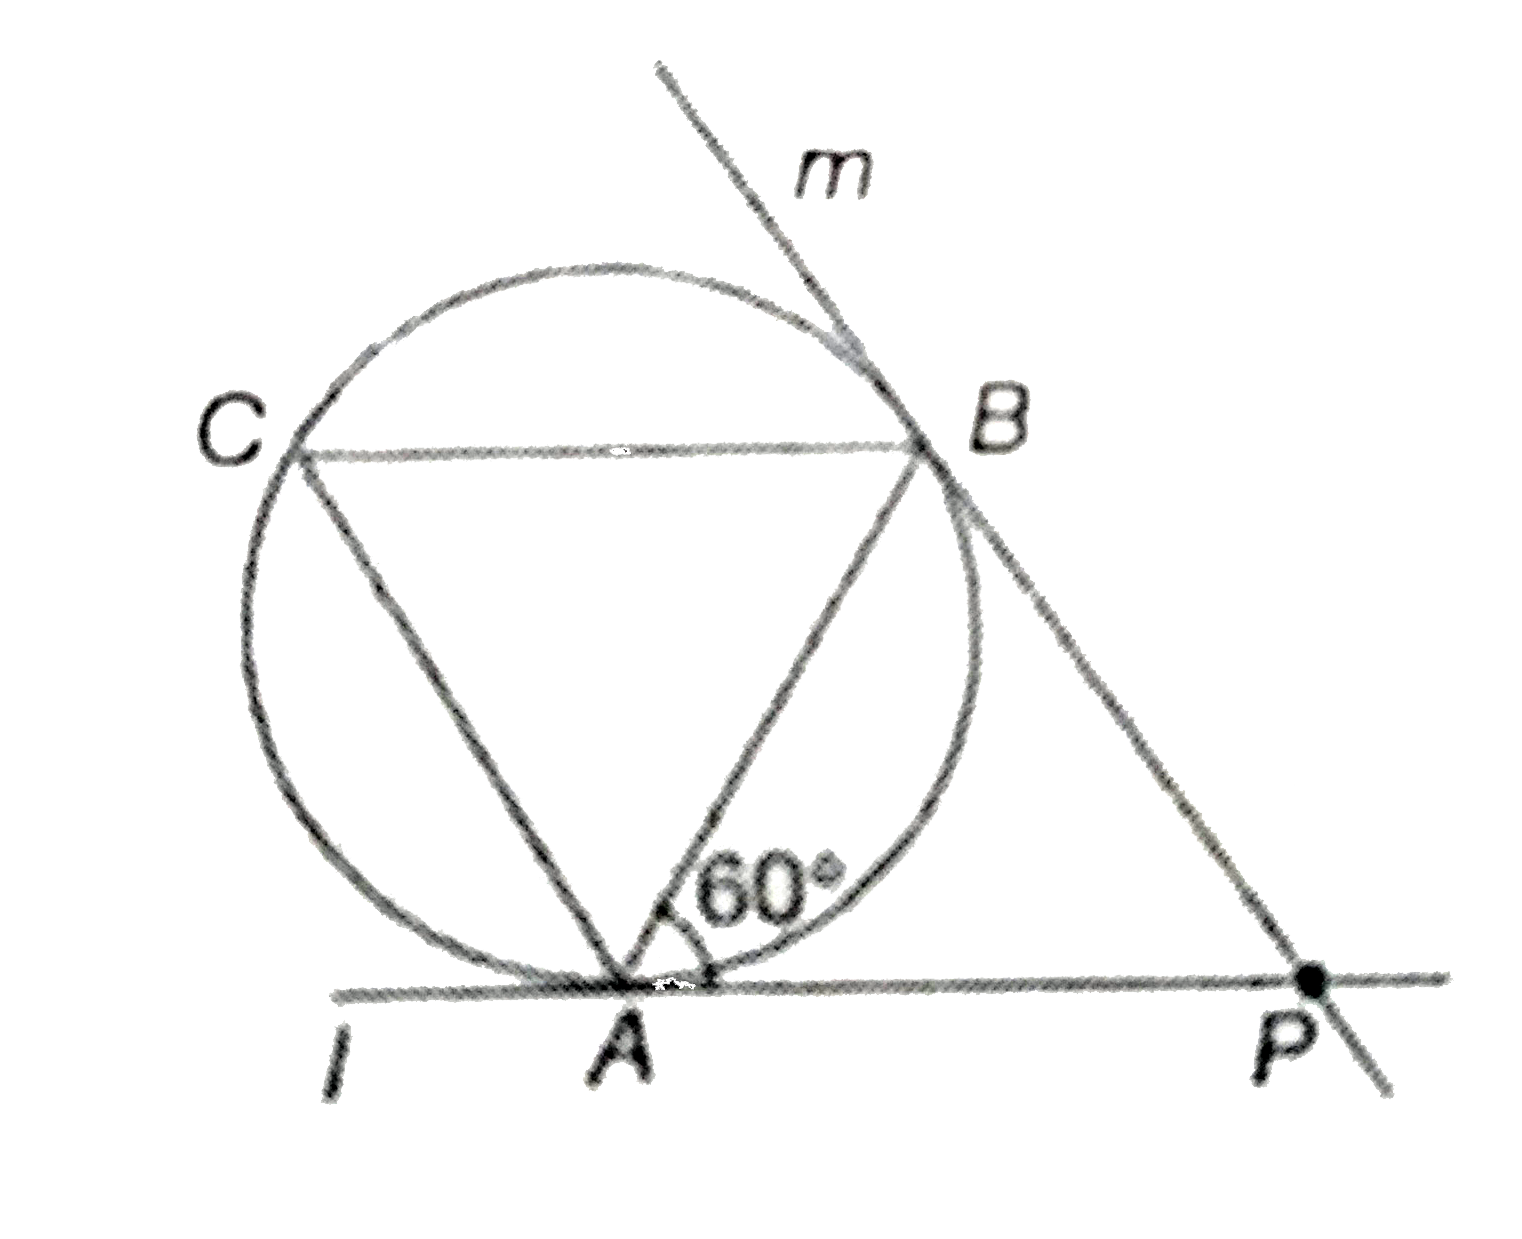 In the following figure, If l and m are two tangents and AB is a chord making and angle of 60^@ with the tangent l, then the angle between l and m is .